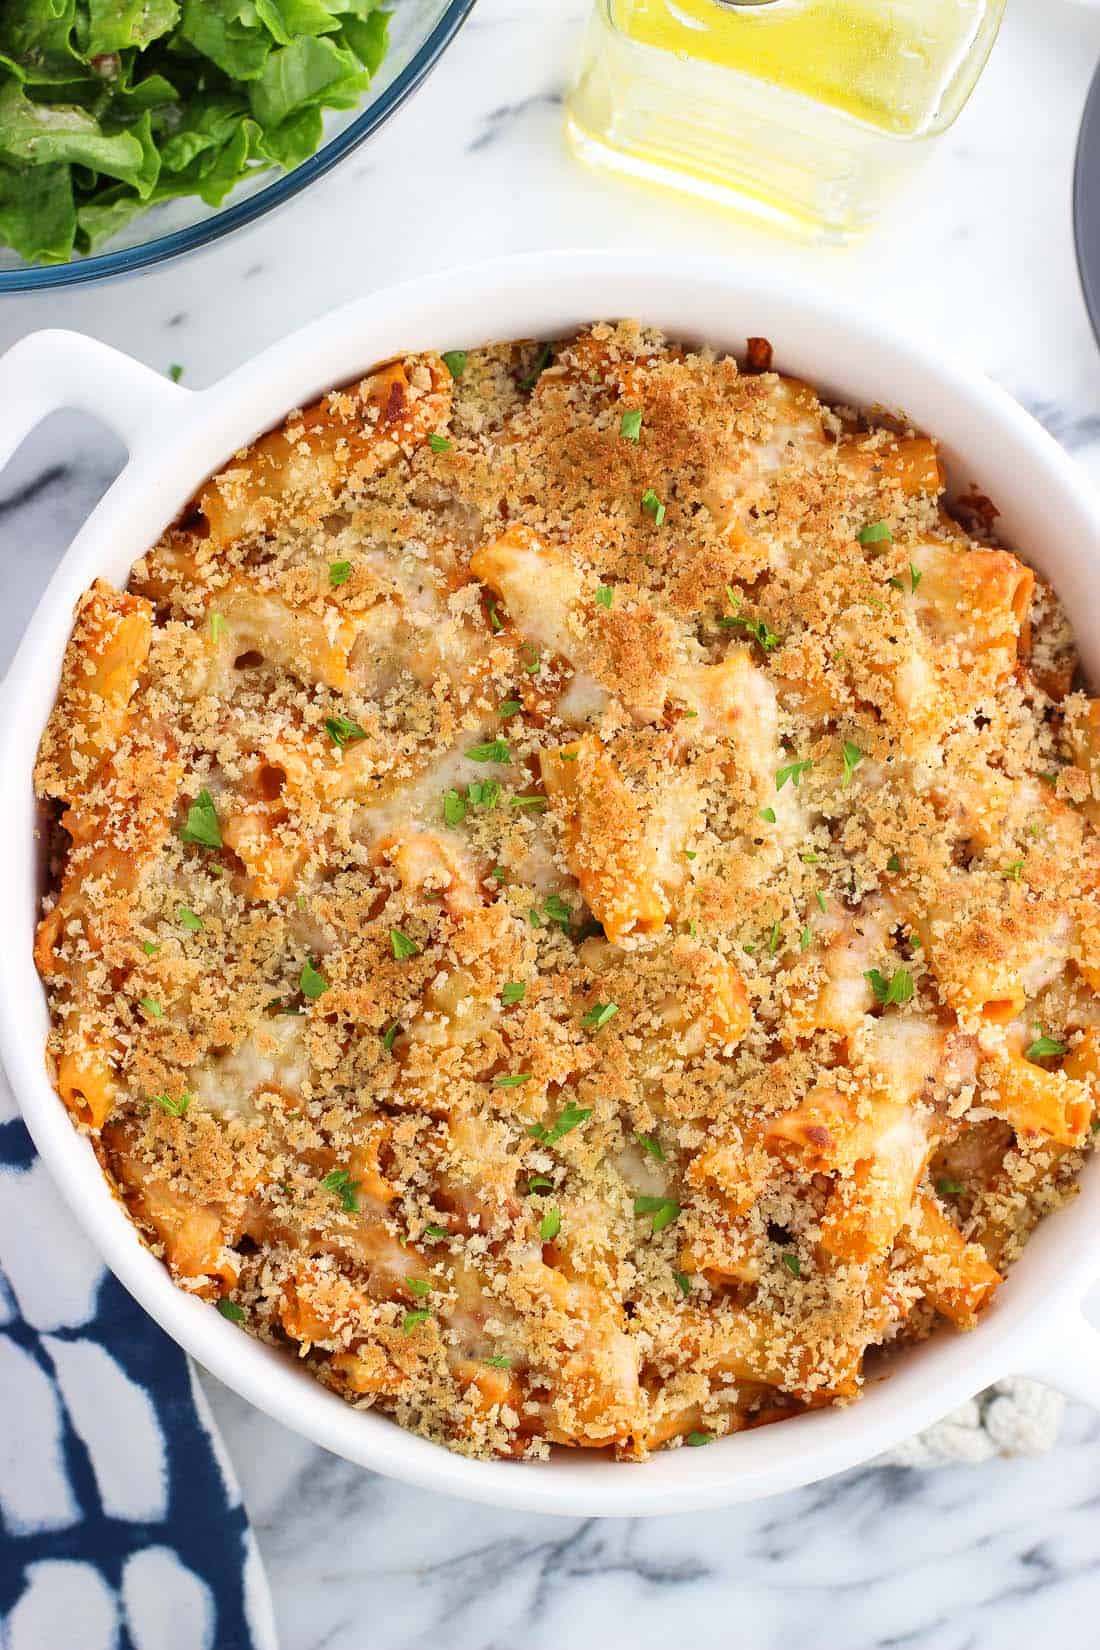 A round ceramic dish filled with baked pasta and topped with a layer of crispy panko.